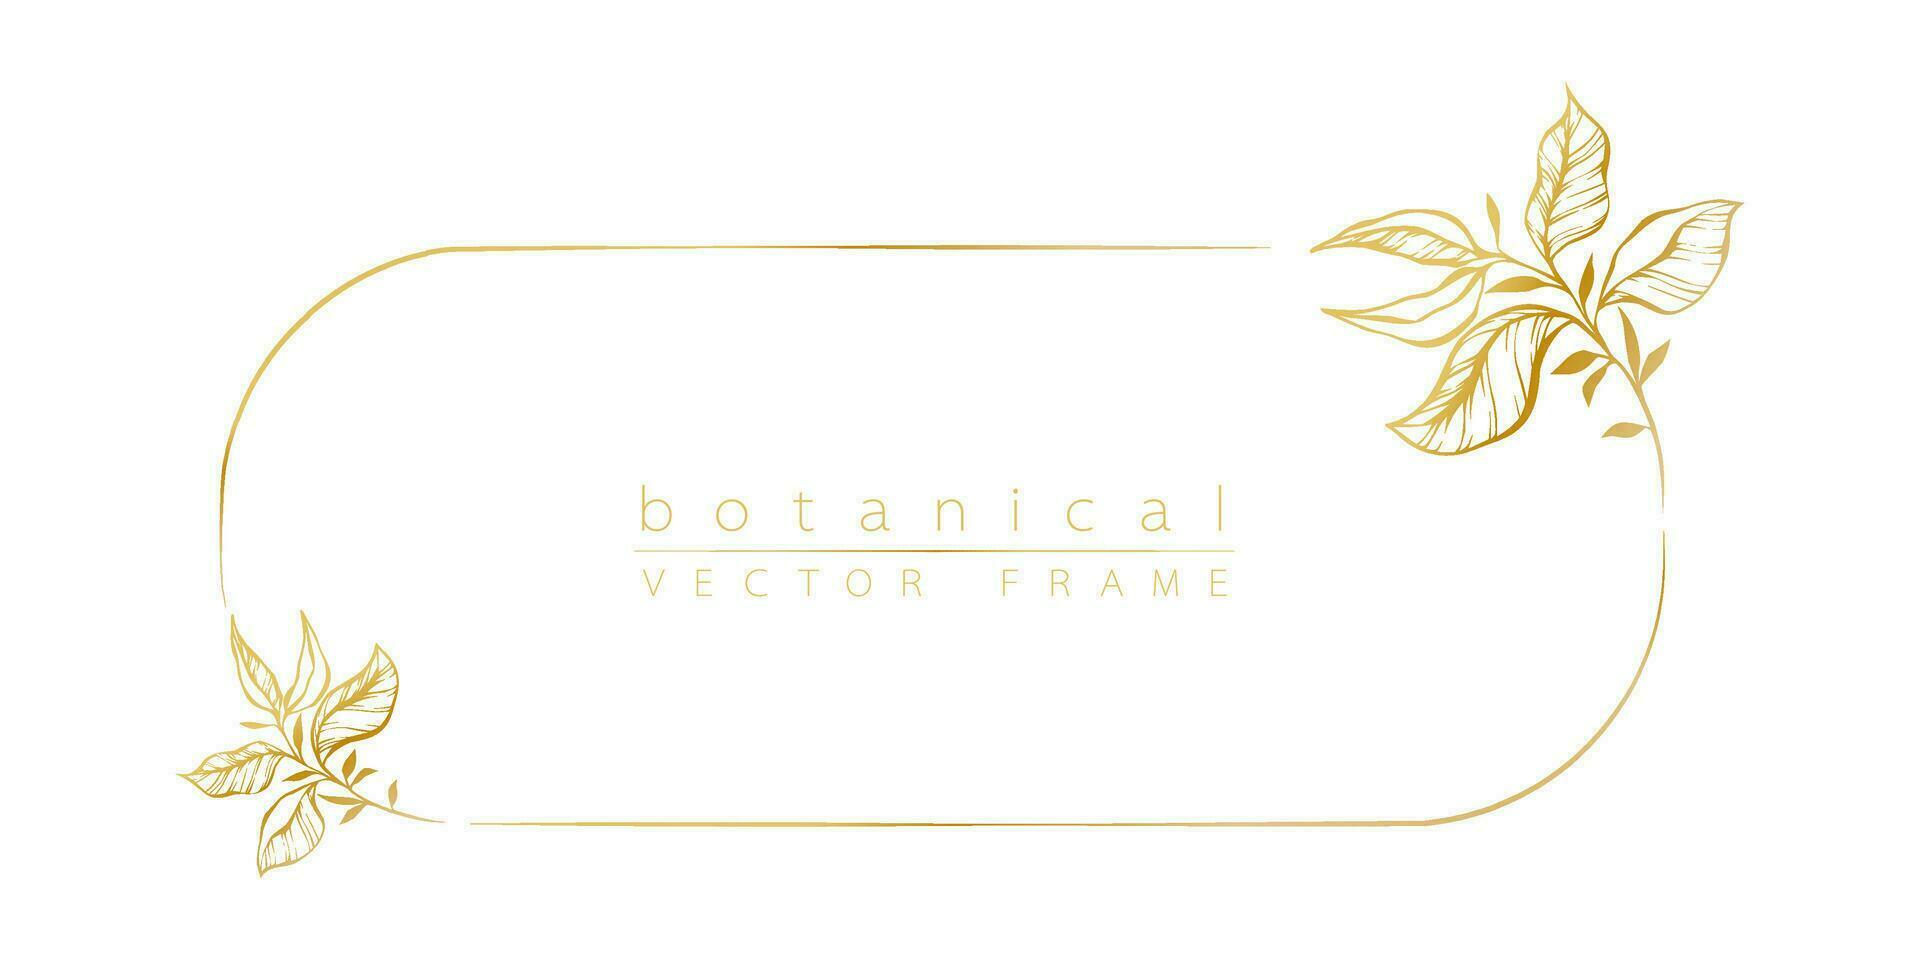 Logo template in minimal linear style with hand drawn branches and leaves. Elegant floral frame. Botanical vector illustration for labels, corporate identity, wedding invitation, save the date